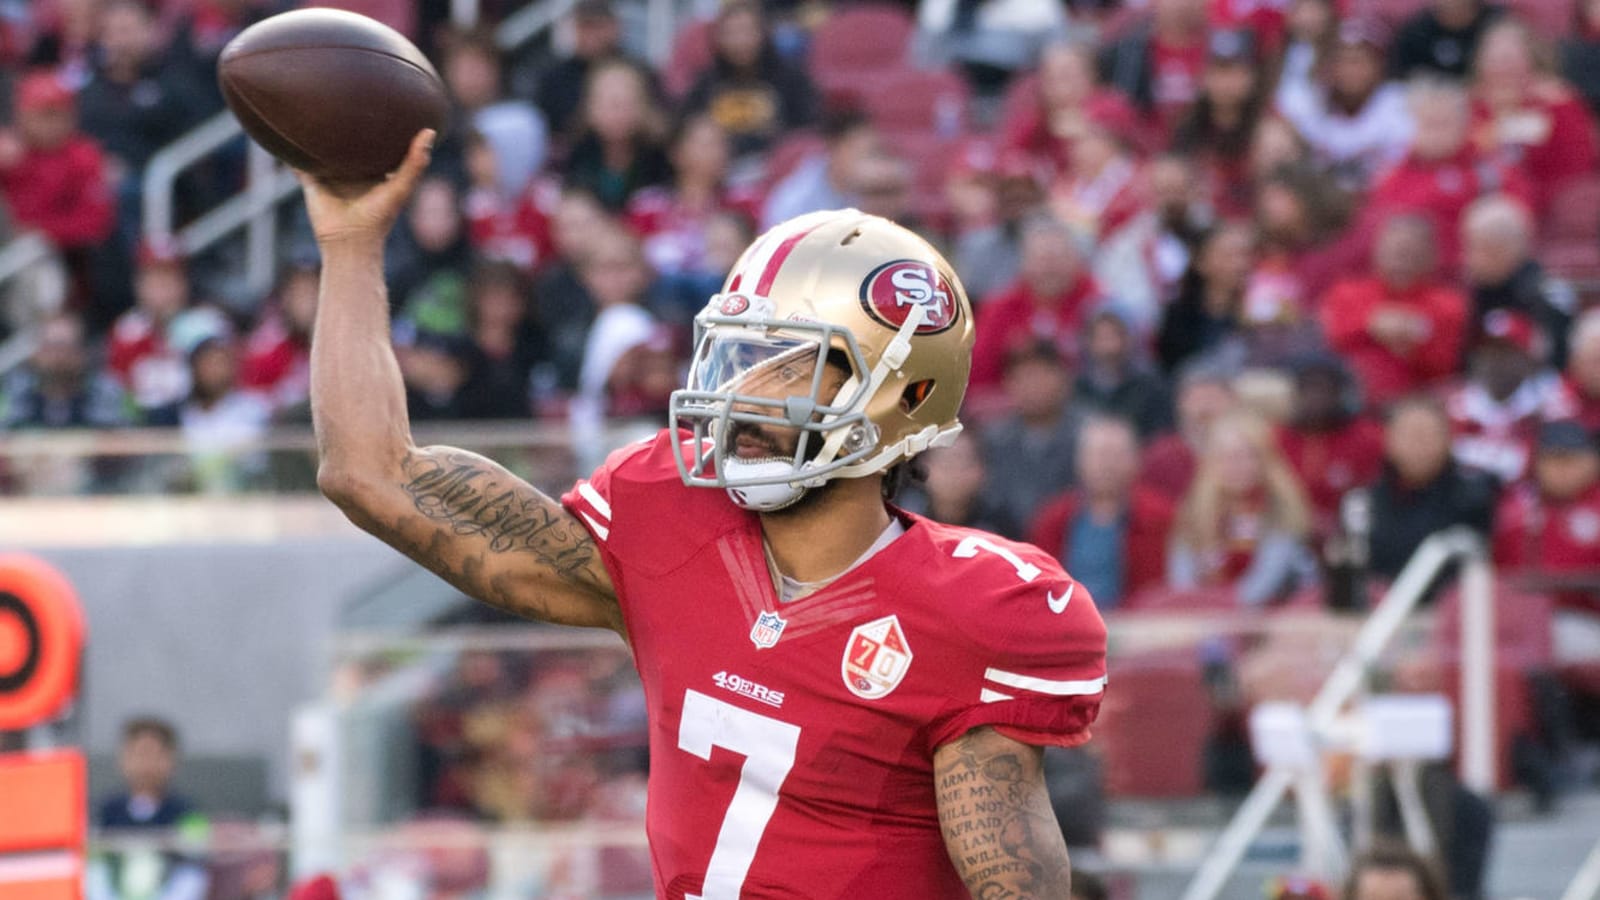 NFL.com changes Colin Kaepernick's listing from 'retired' to 'UFA'